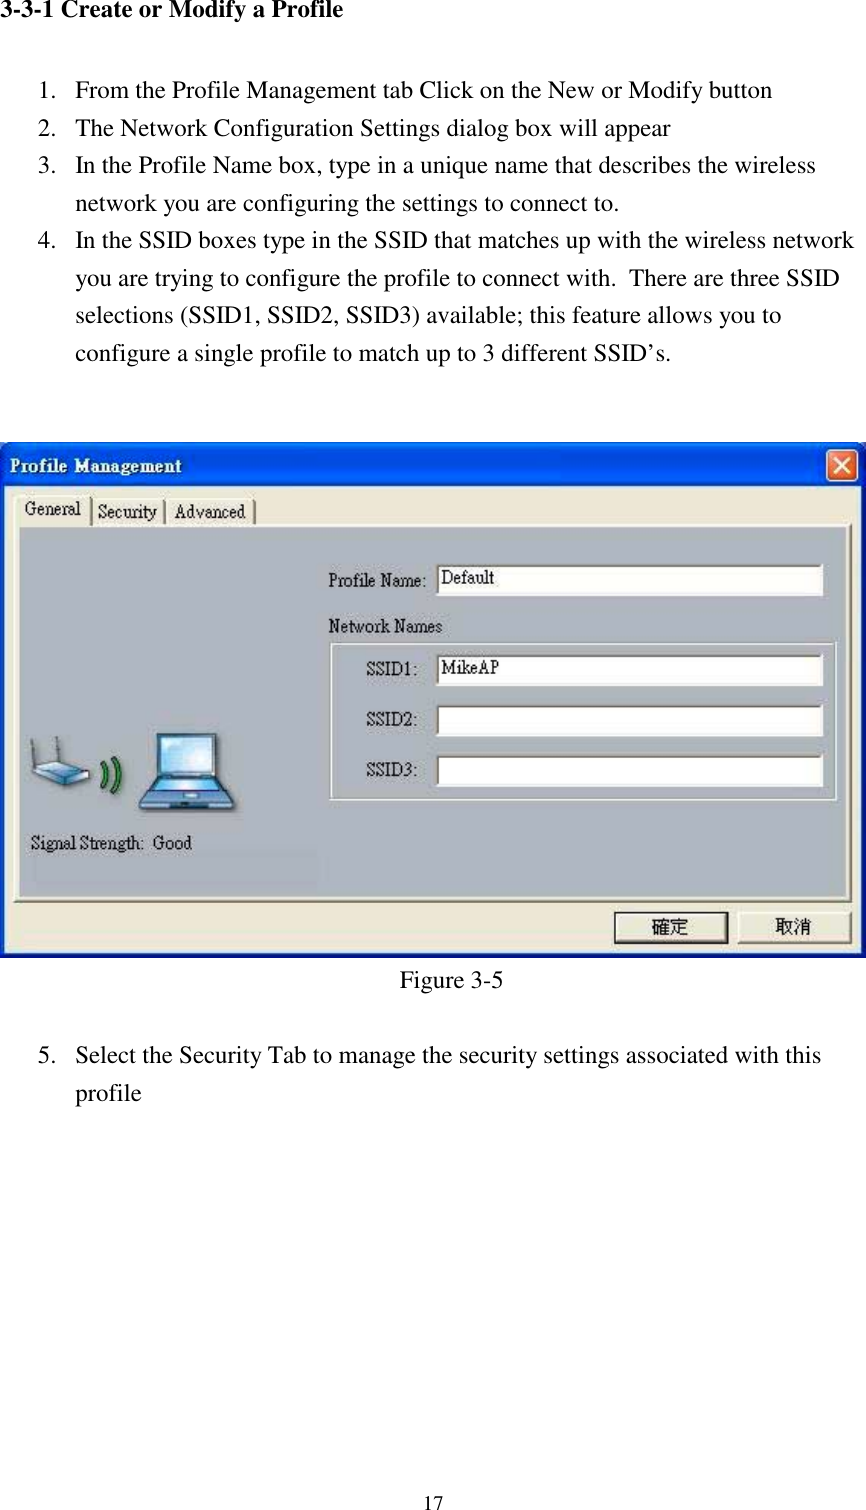 173-3-1 Create or Modify a Profile1. From the Profile Management tab Click on the New or Modify button2. The Network Configuration Settings dialog box will appear3. In the Profile Name box, type in a unique name that describes the wirelessnetwork you are configuring the settings to connect to.4. In the SSID boxes type in the SSID that matches up with the wireless networkyou are trying to configure the profile to connect with.  There are three SSIDselections (SSID1, SSID2, SSID3) available; this feature allows you toconfigure a single profile to match up to 3 different SSID’s.Figure 3-55. Select the Security Tab to manage the security settings associated with thisprofile